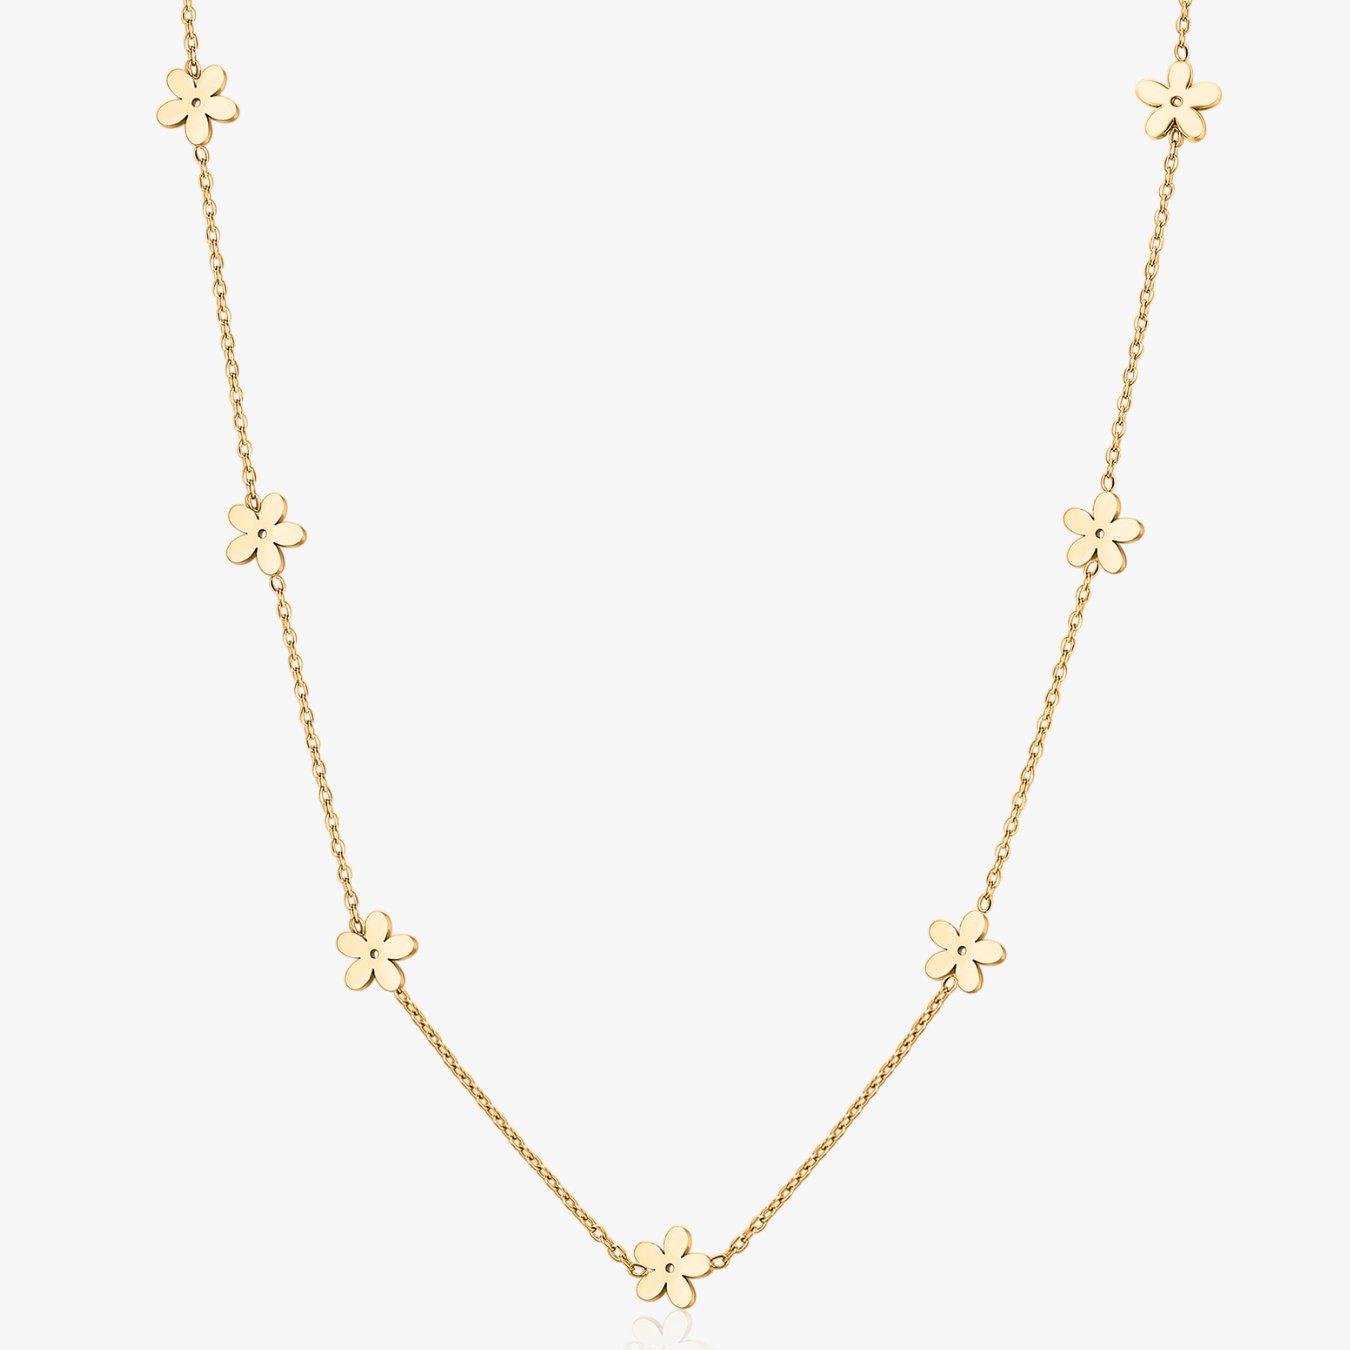 Simply Floral Choker Necklace in Gold - Flaire & Co.